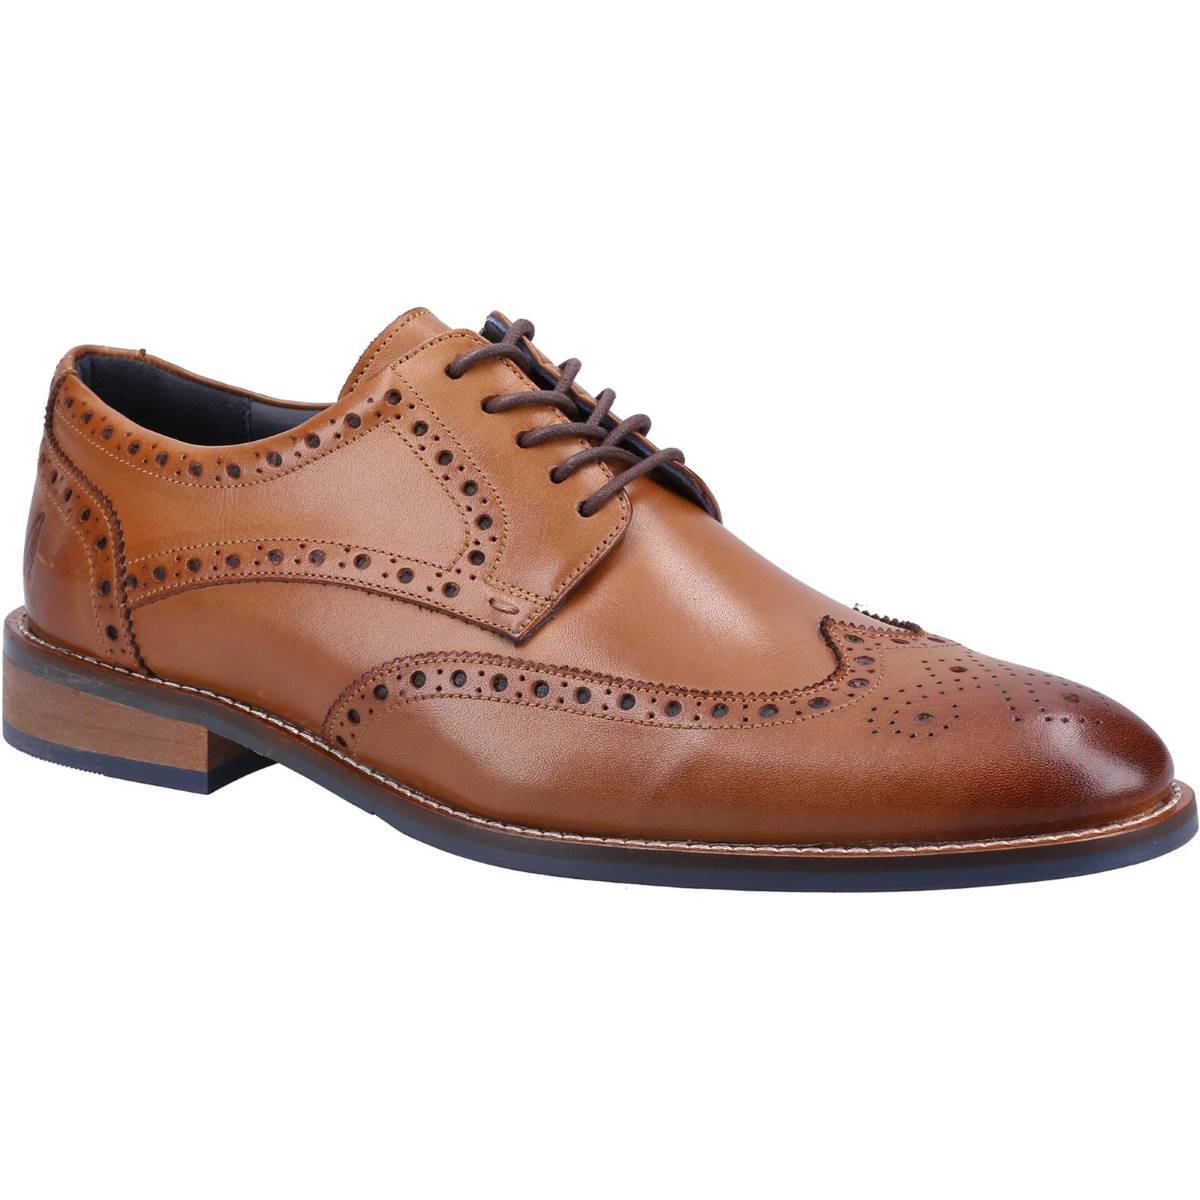 Hush Puppies Dustin Brogue Tan Mens formal shoes HP-36819-68804 in a Plain Leather in Size 11